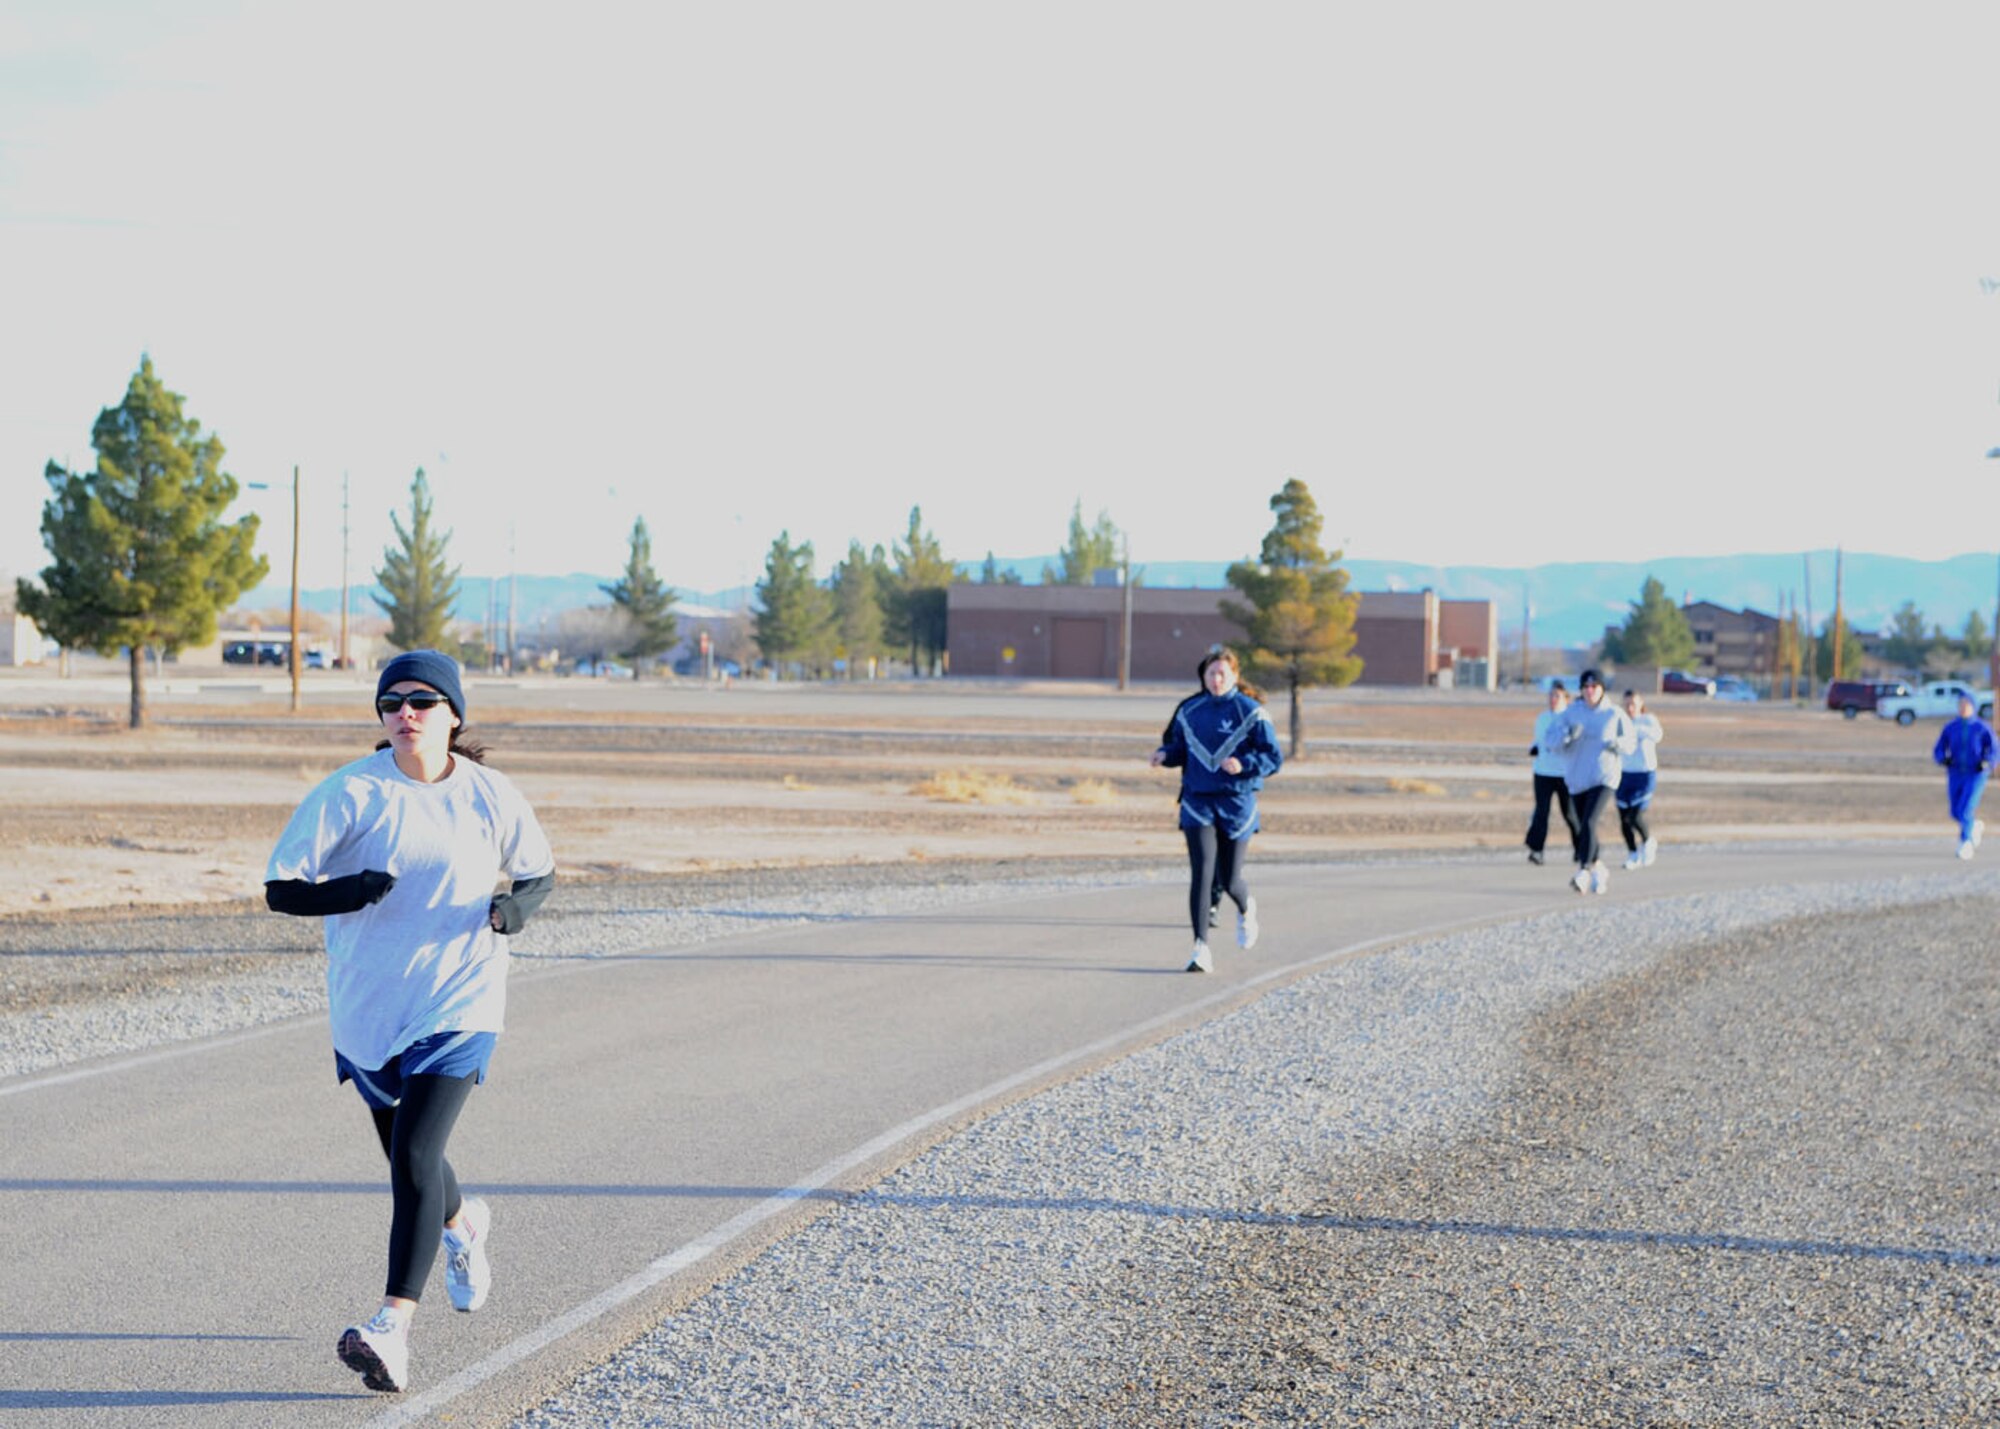 Participants in the Holloman Air Force Base, N.M., Frosty 5k run their first lap of three around the track at the Fitness and Sports Center Dec. 19. All of the participants completed the event in 31 minutes. (U.S Air Force photo/ Airman 1st Class DeAndre Curtiss